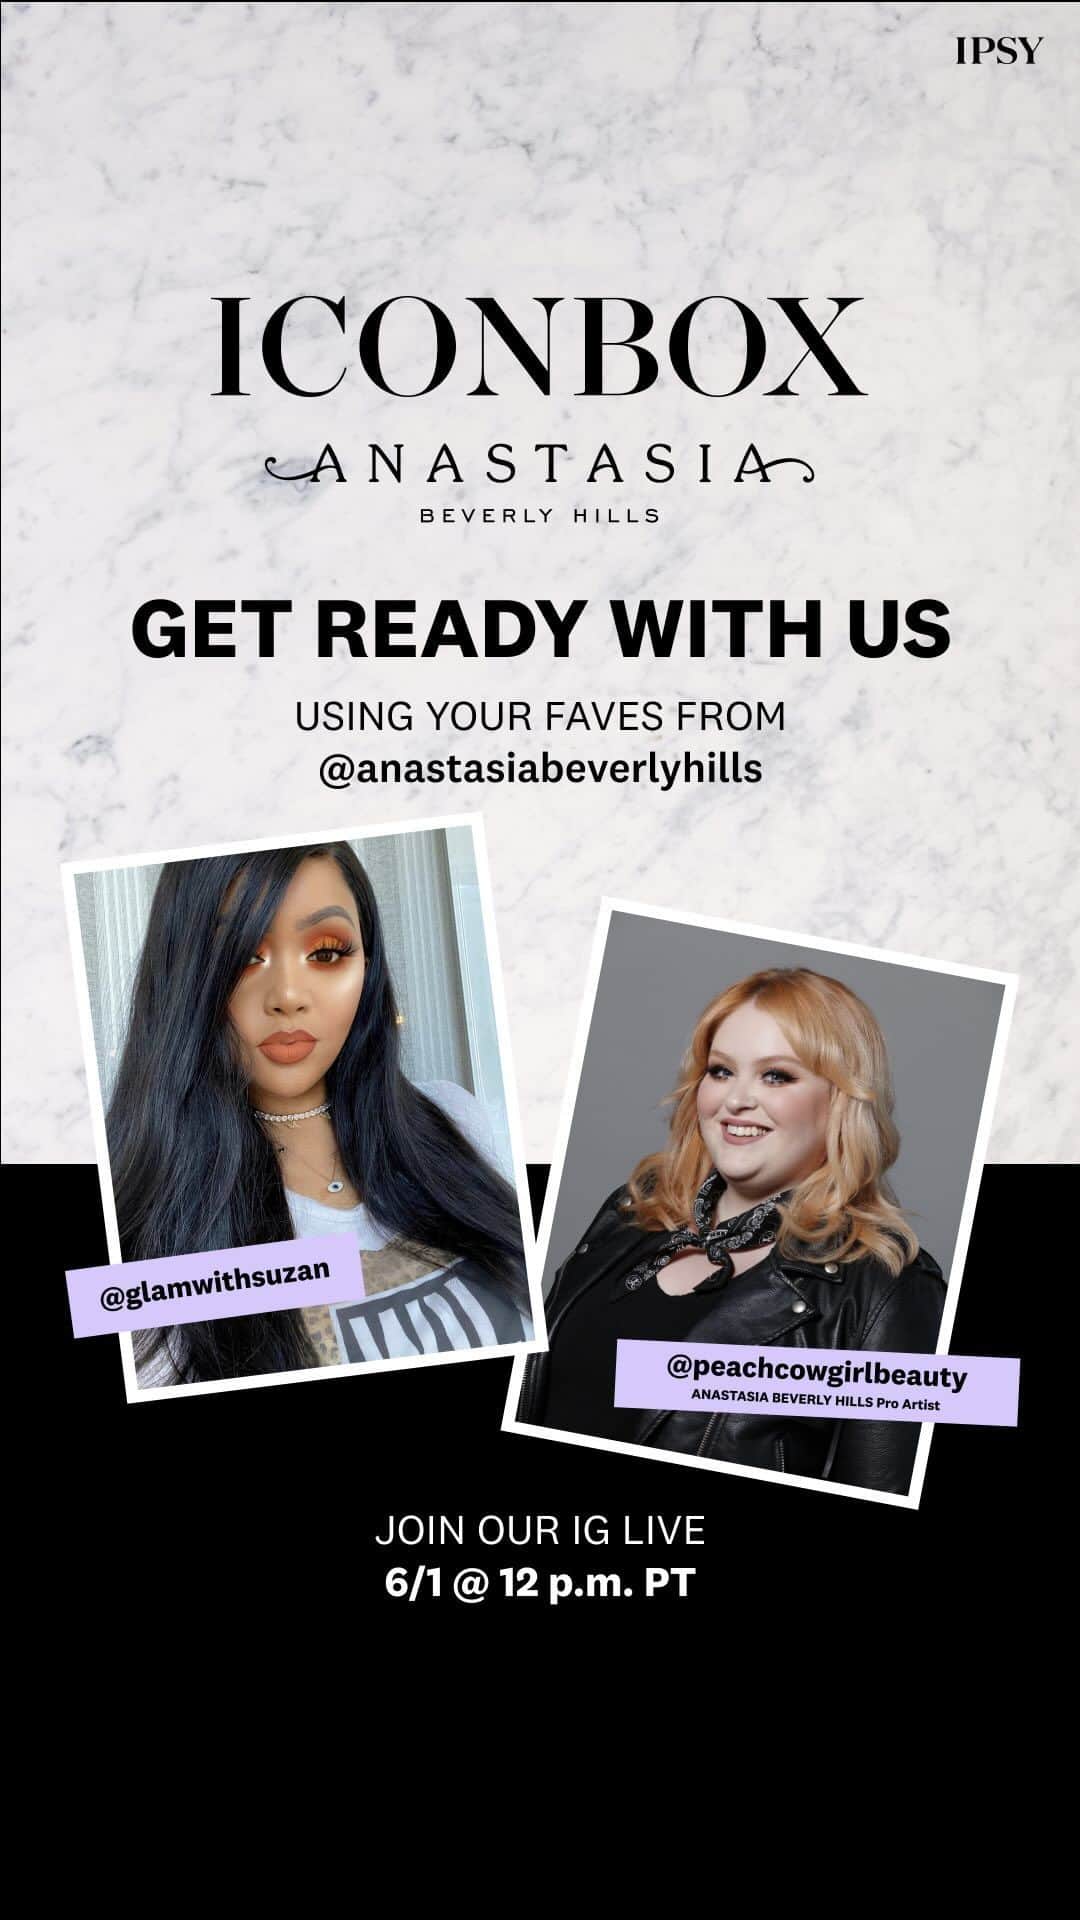 ipsyのインスタグラム：「GIVEAWAY! Want to win an #AnastasiaBeverlyHills Prize Pack and a one-year subscription to IPSY? Follow the rules below to enter:  1. Follow @ipsy and @anastasiabeverlyhills on Instagram 2. Like this post 3. Tag a friend in the comments below 4. Include #IPSY #Giveaway in your comment  Deadline to enter is 6/08/23 at 11:59 p.m. PT and the winner will be announced on 6/12/23. ⁠To enter this giveaway, you must be 18 years old or older and a resident of the U.S. or Canada (excluding the Province of Quebec). By posting your comment with these hashtags, you agree to be bound by the terms of the Official Giveaway Rules at http://www.ipsy.com/contest-terms. This giveaway is in no way sponsored, endorsed or administered by, or associated with, Instagram.」